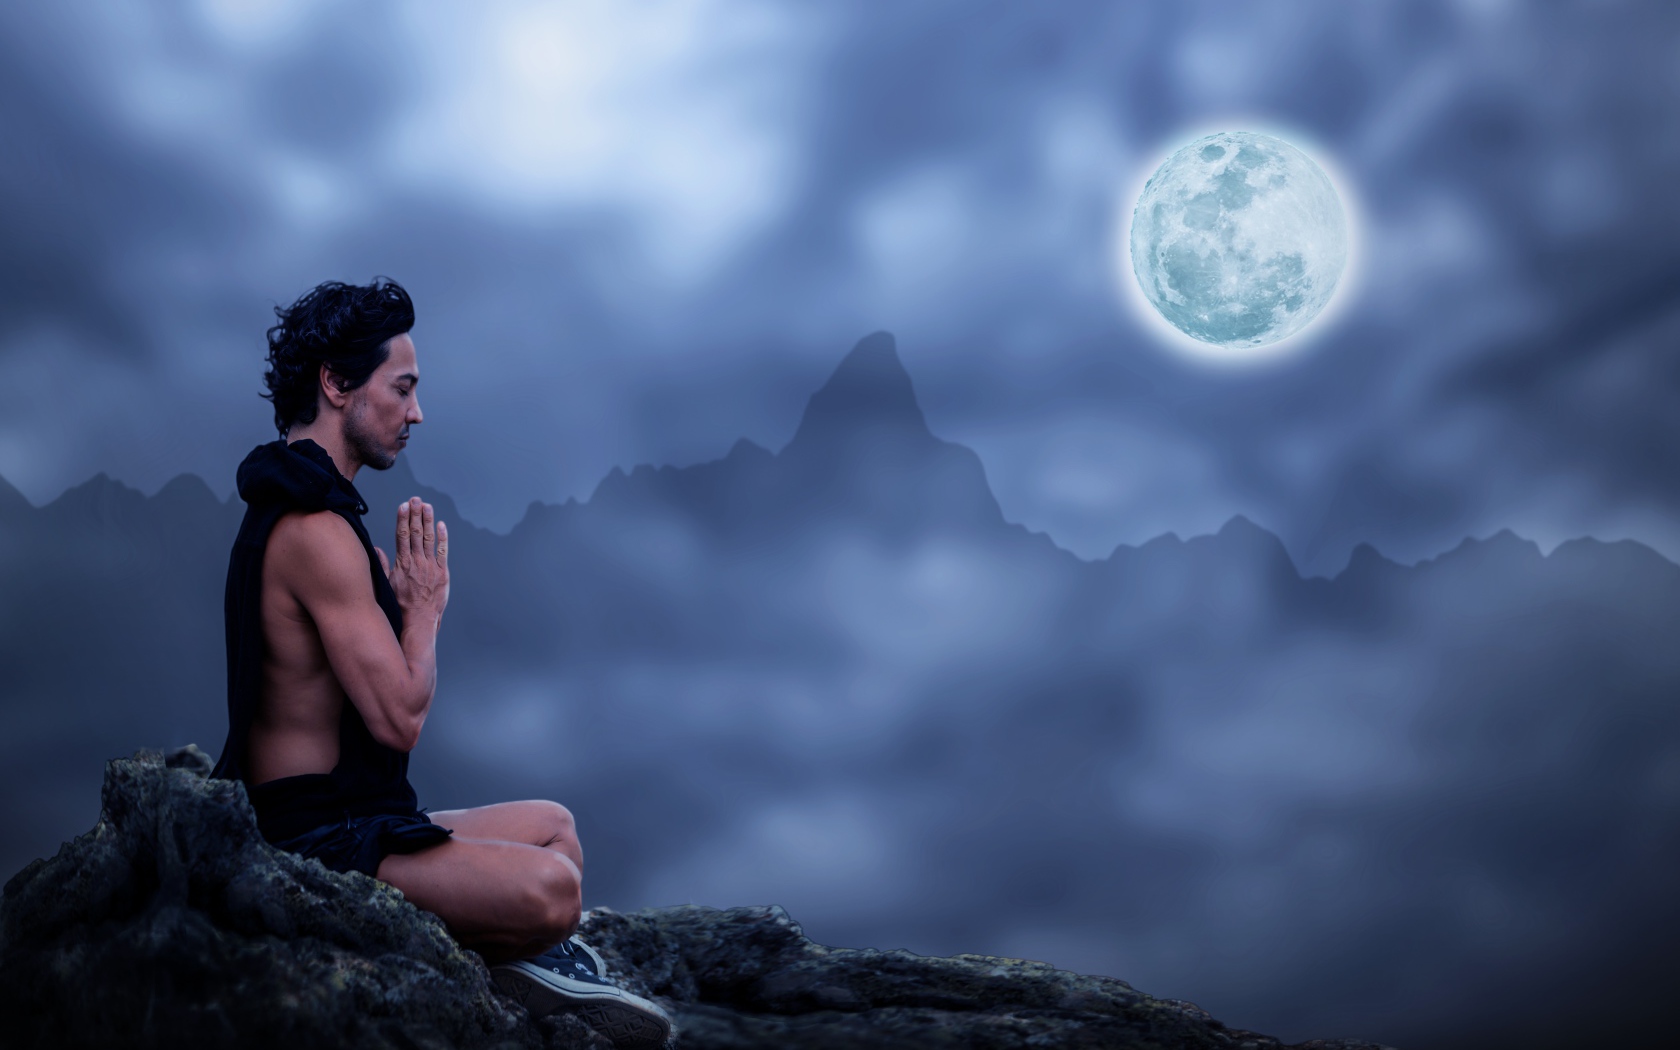 A man meditates on a stone at night on a full moon